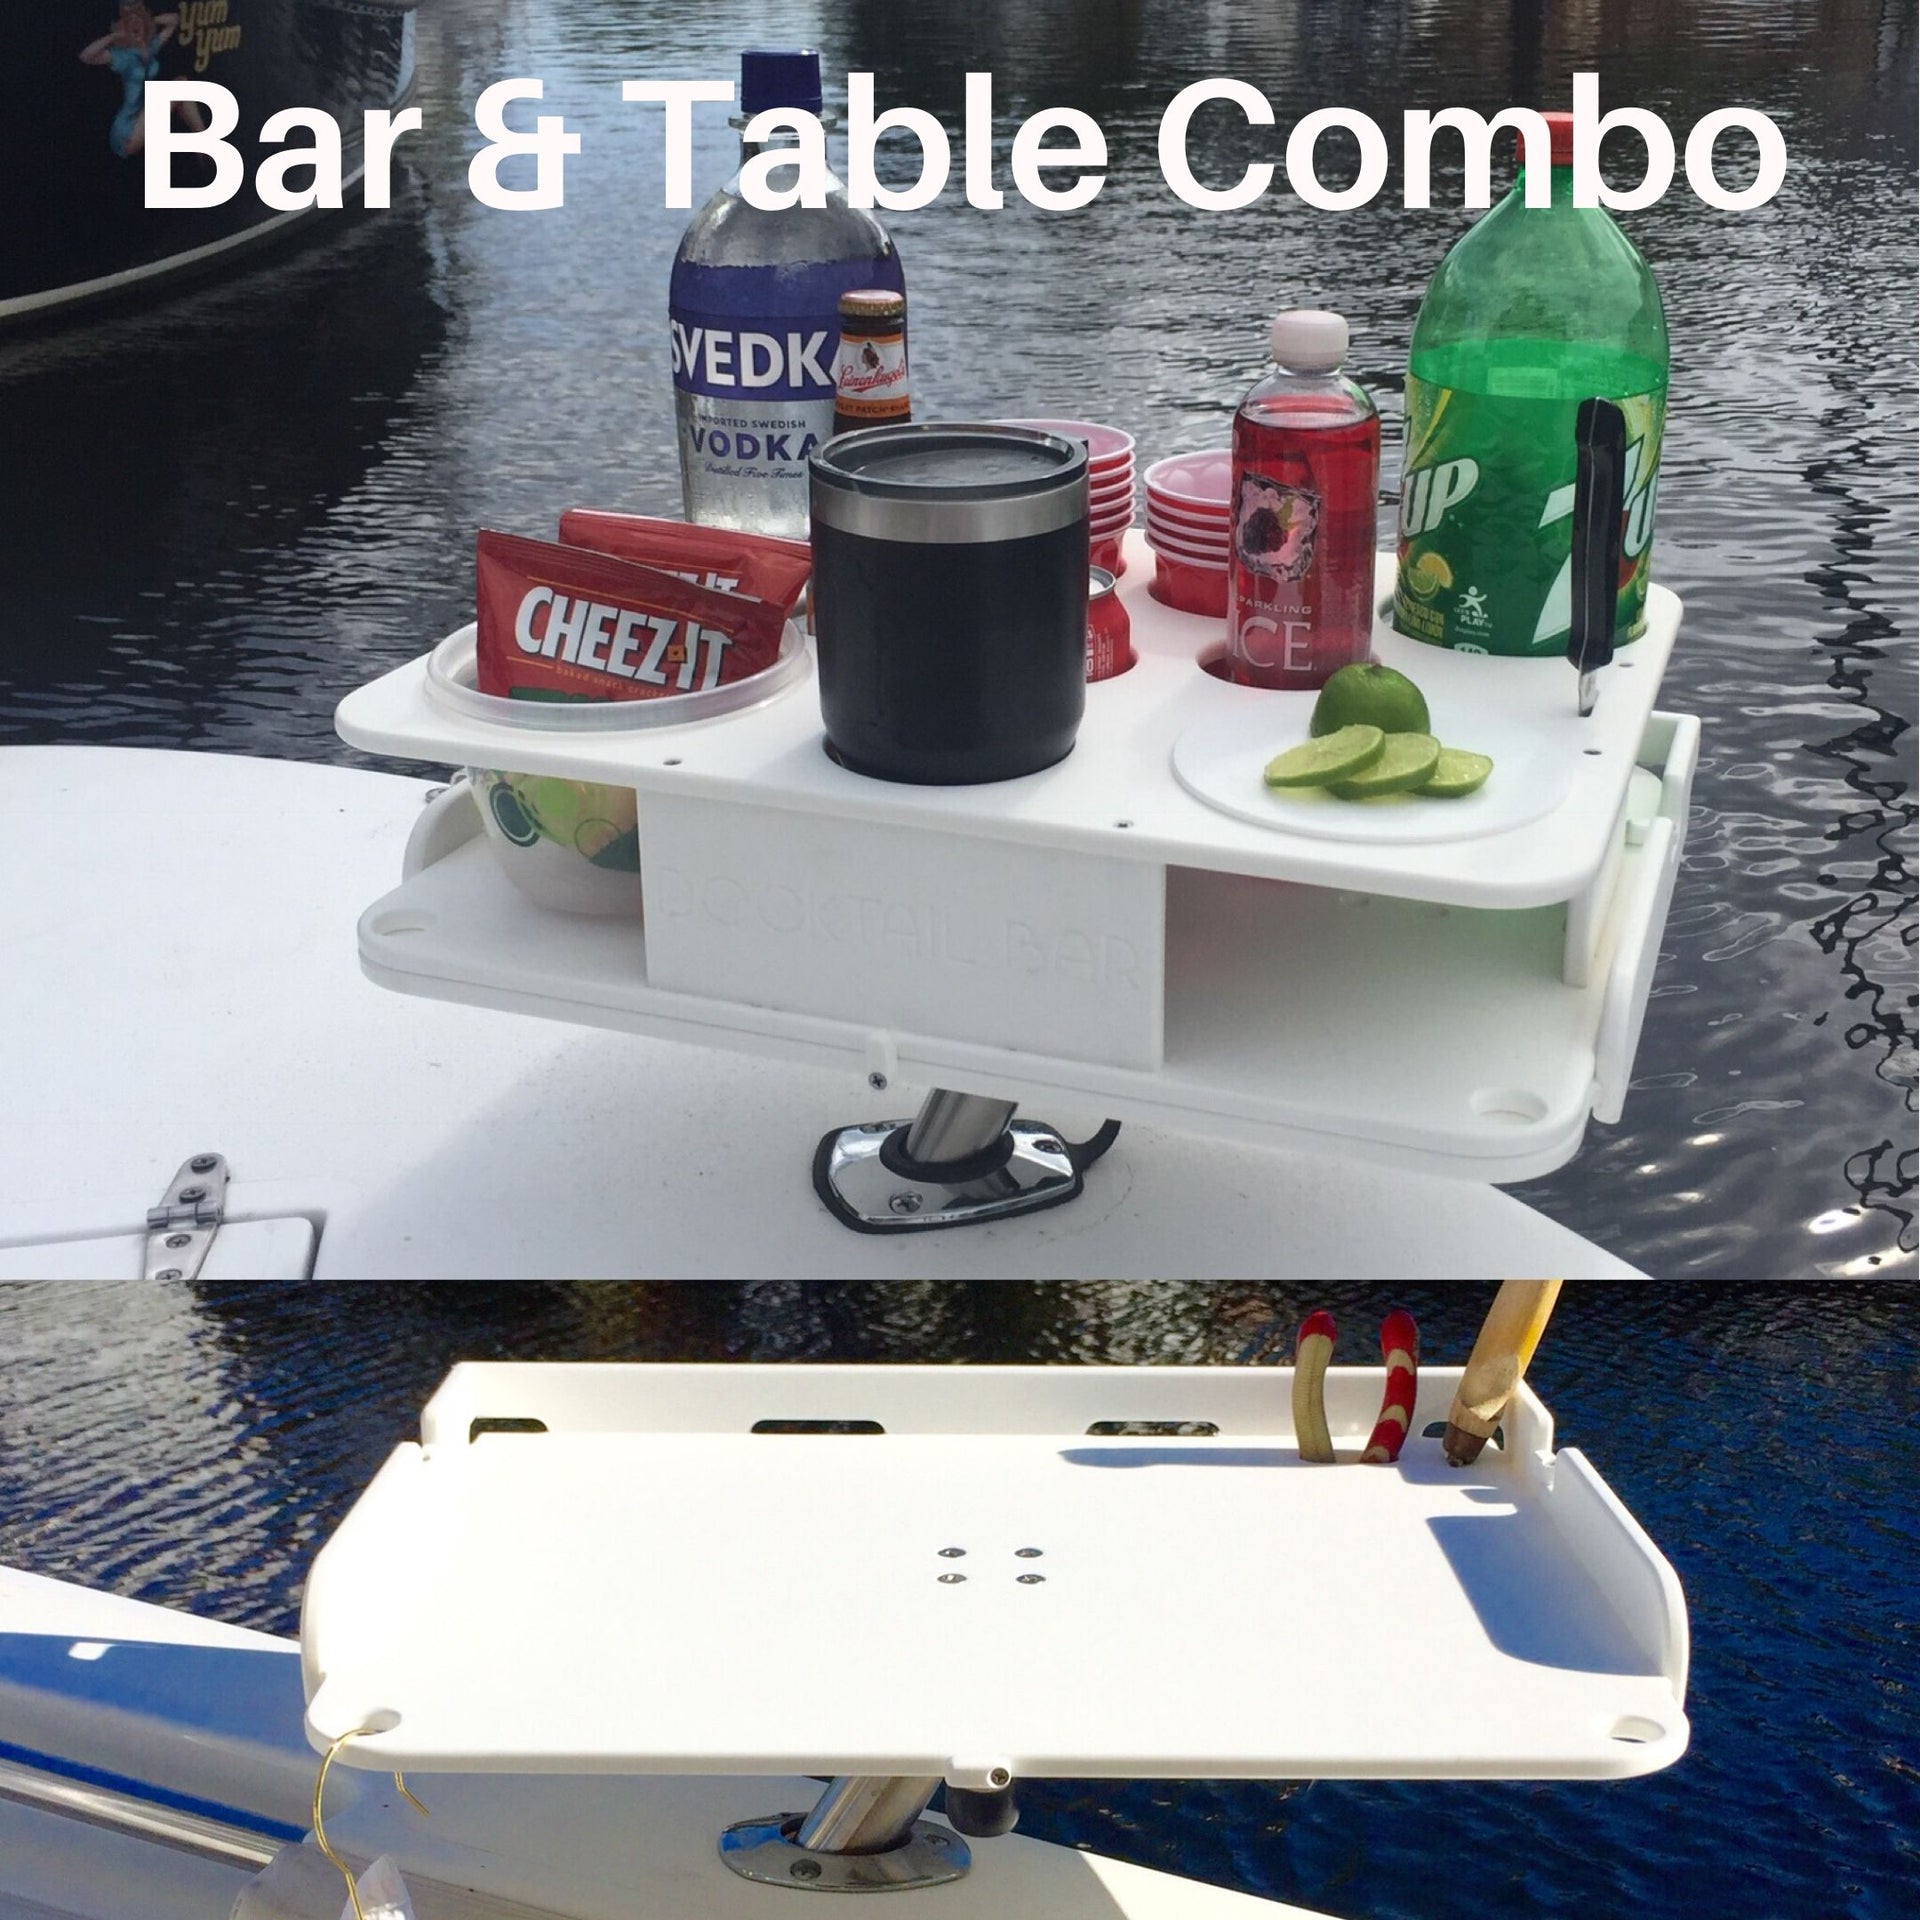 Best Choice For Fishing & Drinks